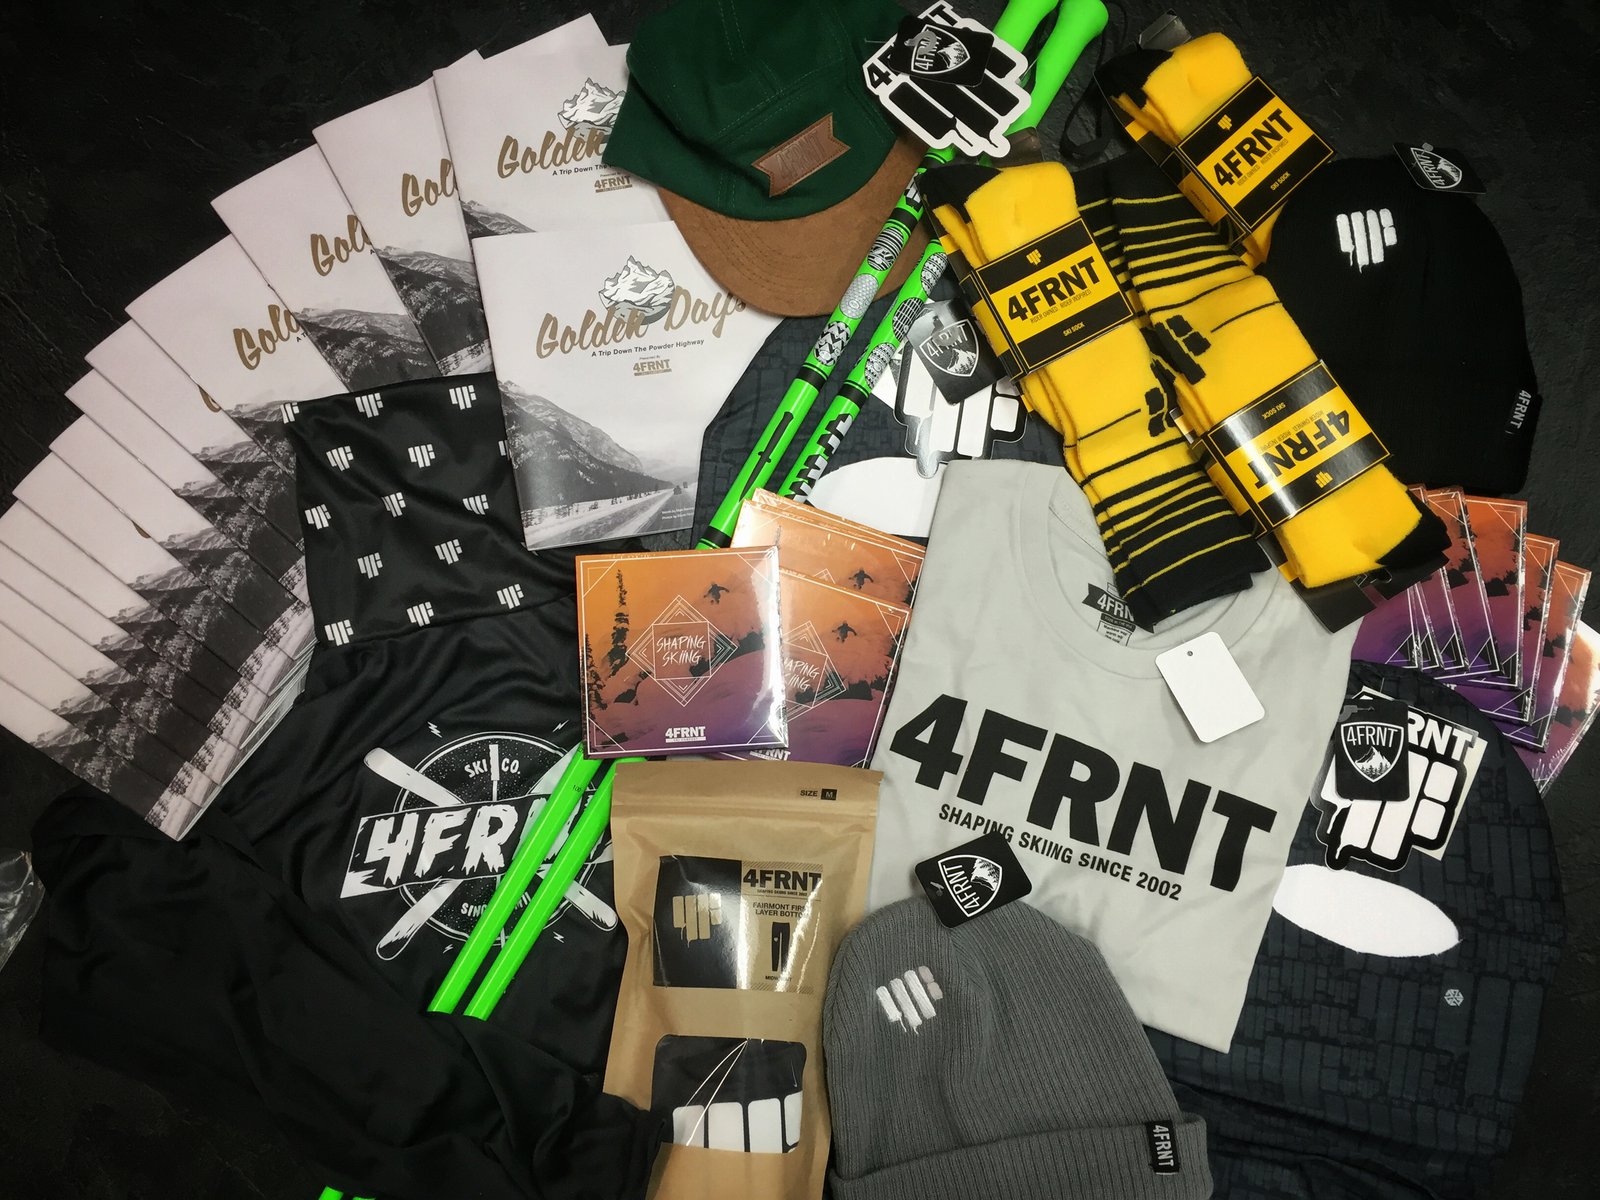 4FRNT Giveaway Contest #ourgoldendays